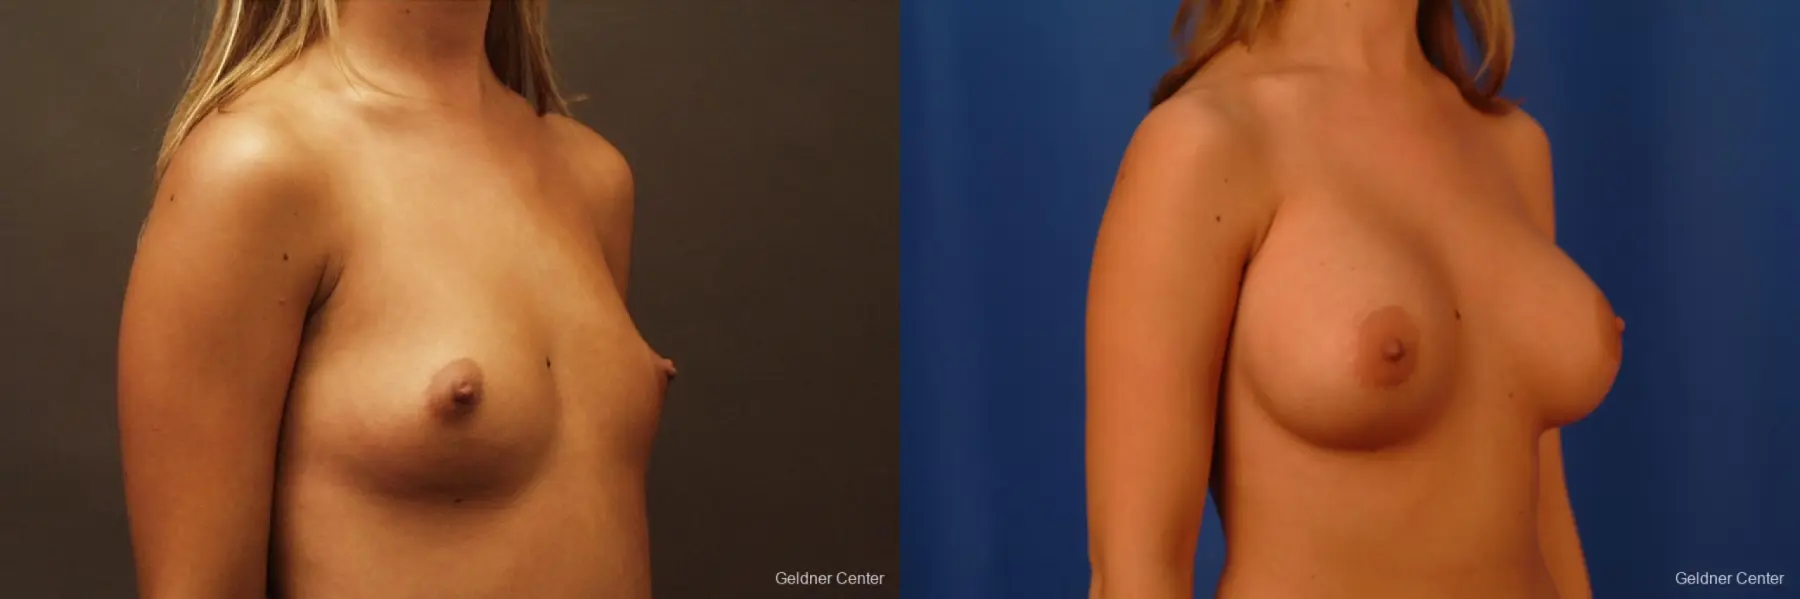 Breast Augmentation Lake Shore Dr, Chicago 2533 - Before and After 3